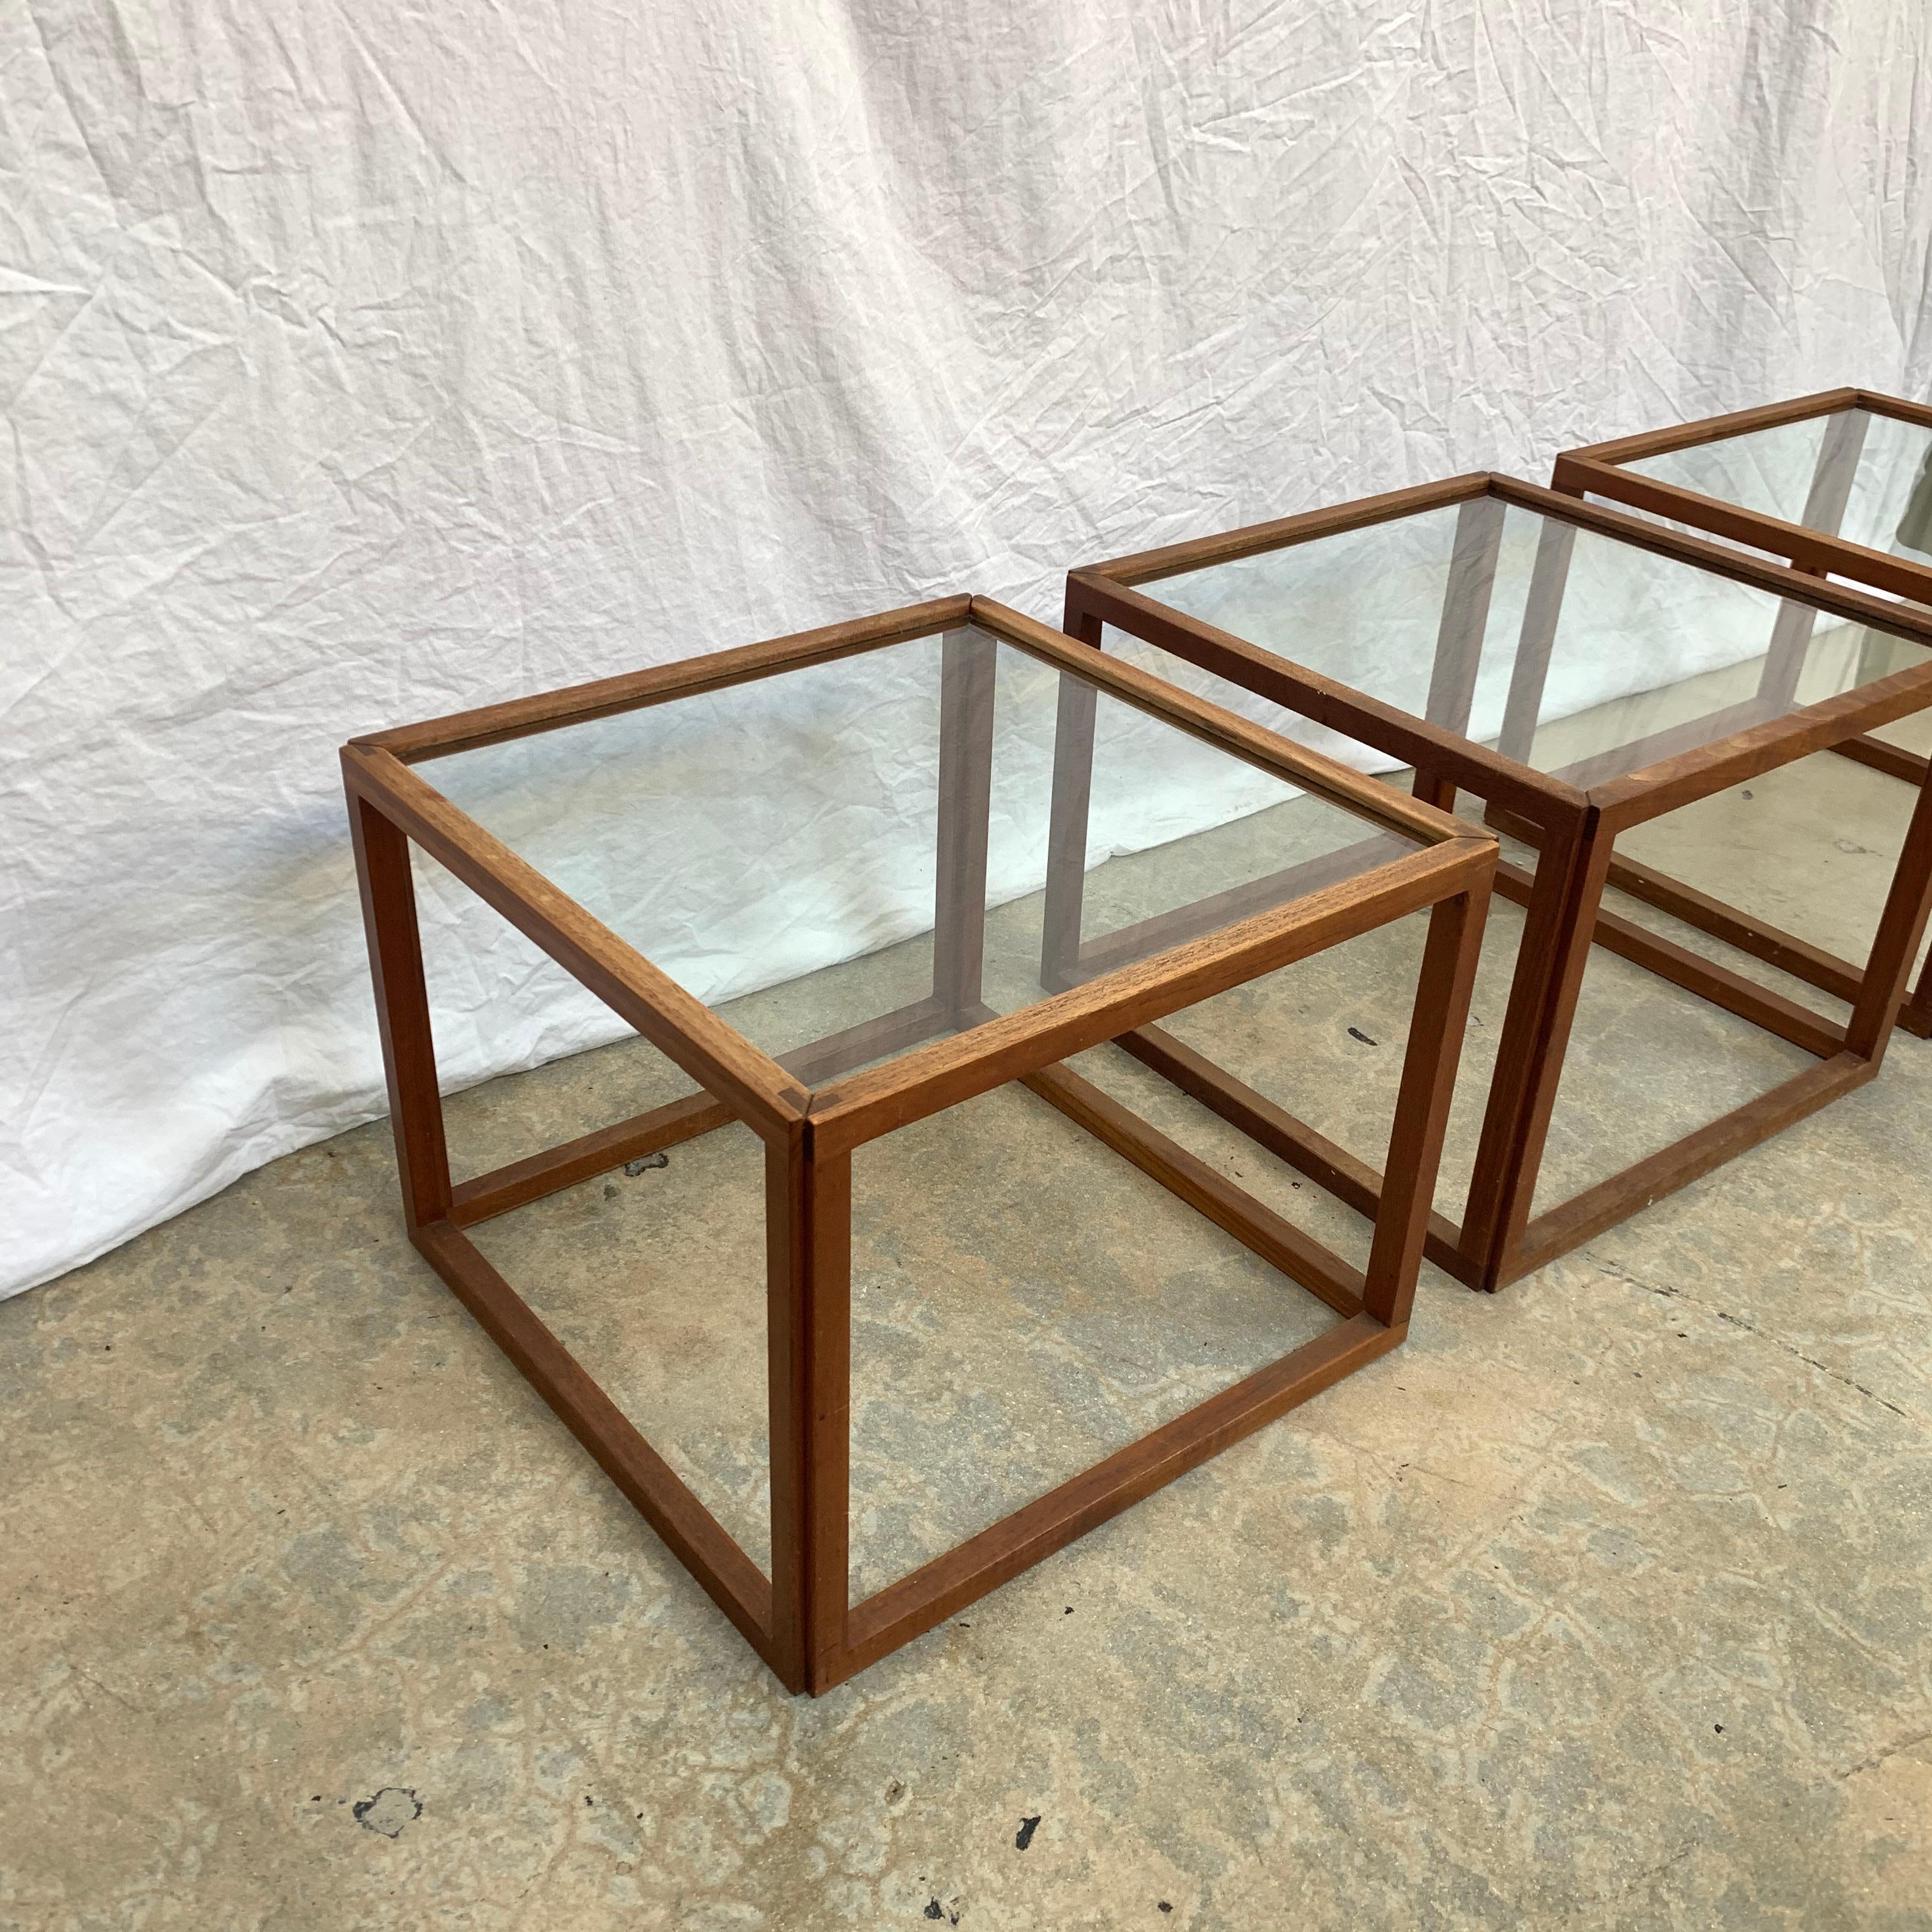 Minimalist cube tables rendered in teak frames with an inset glass top designed by Kai Kristiansen, Denmark, 1950s.

Can be sold individually.